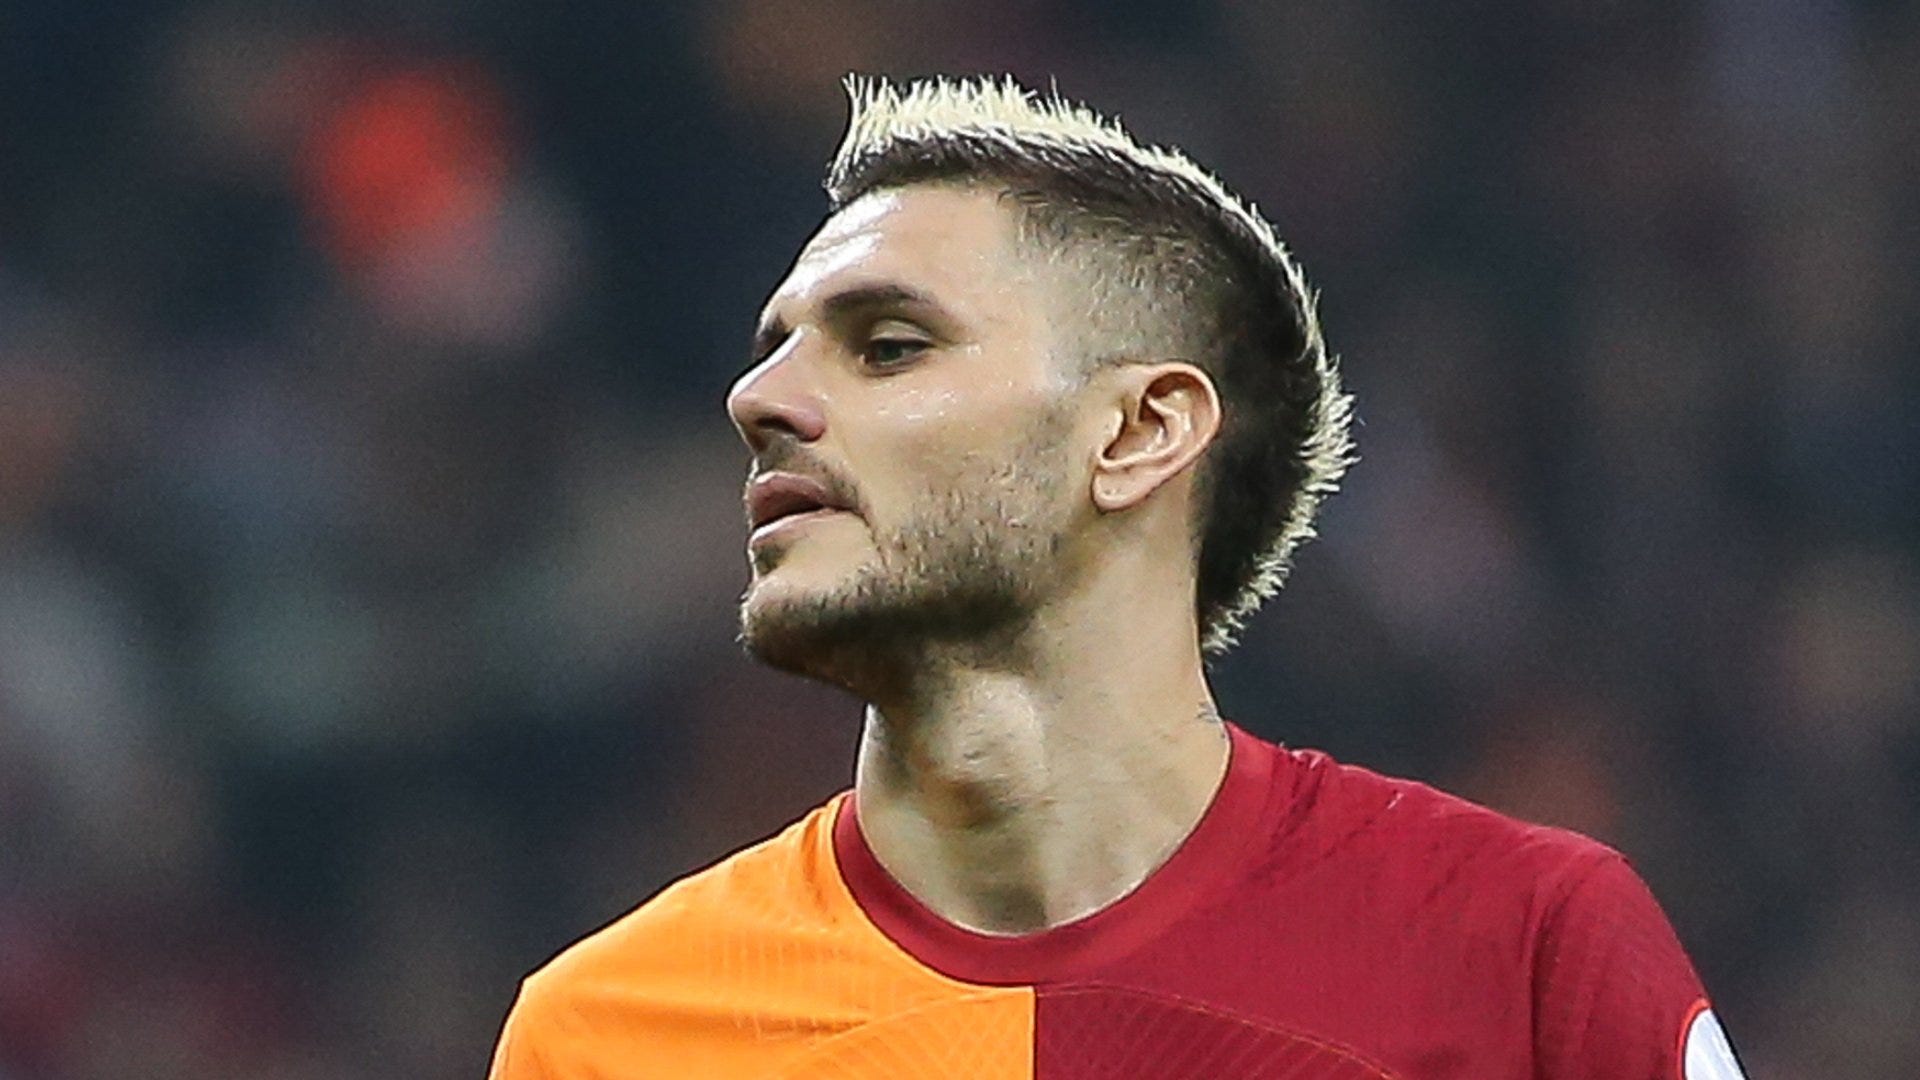 mauro-icardi-gets-a-black-eye-for-christmas-galatasaray-star-shows-off-bruise-after-collision-with-goalpost-in-draw-with-fenerbahce-and-wanda-nara-has-a-shiner-too-or-goal-com-india